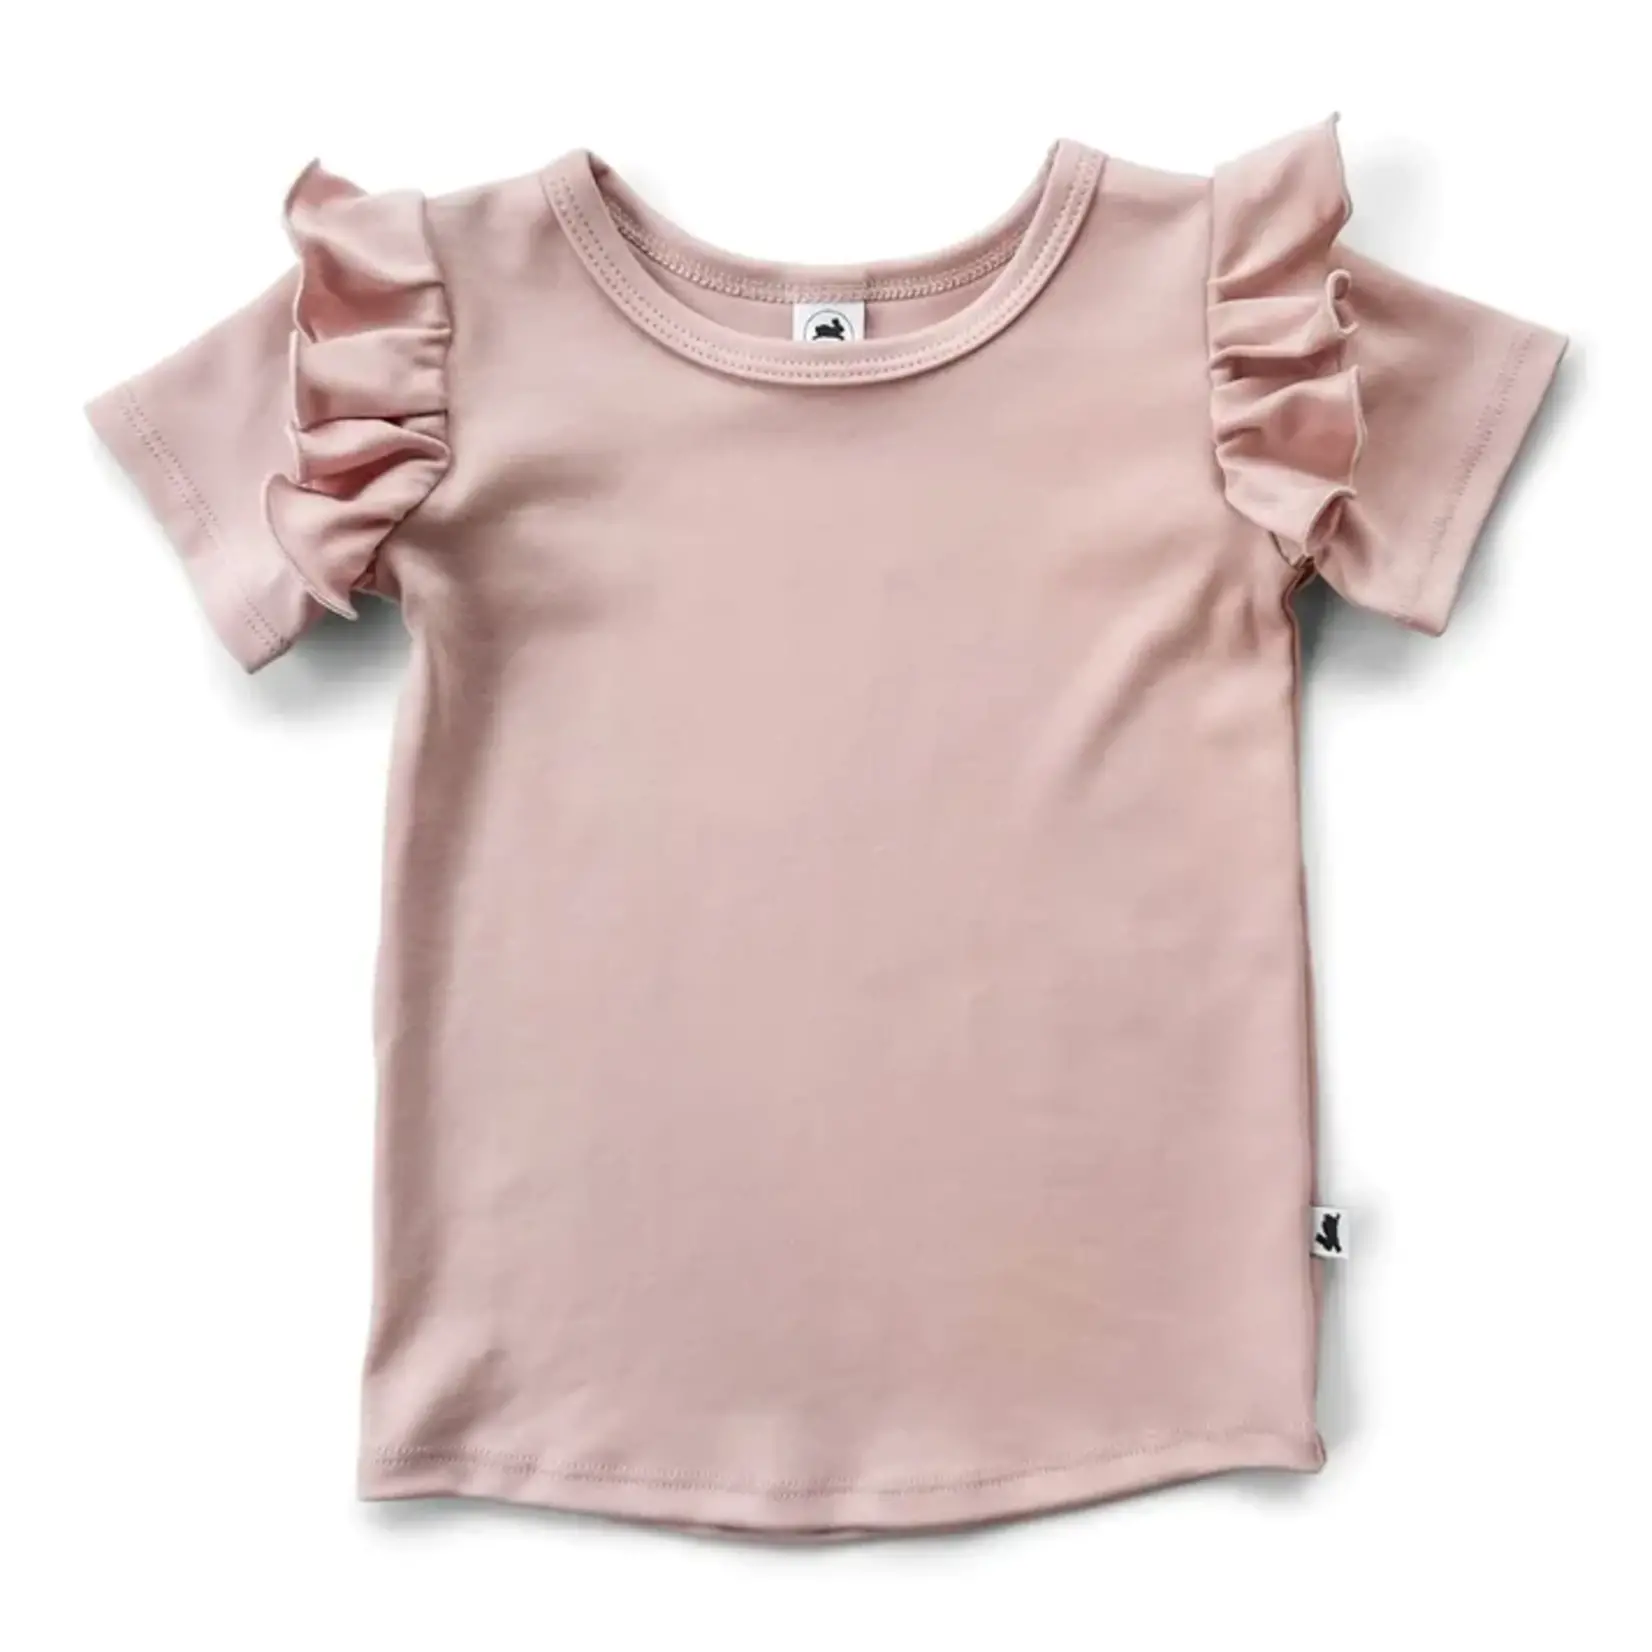 Little & Lively Bamboo Ruffle Tee